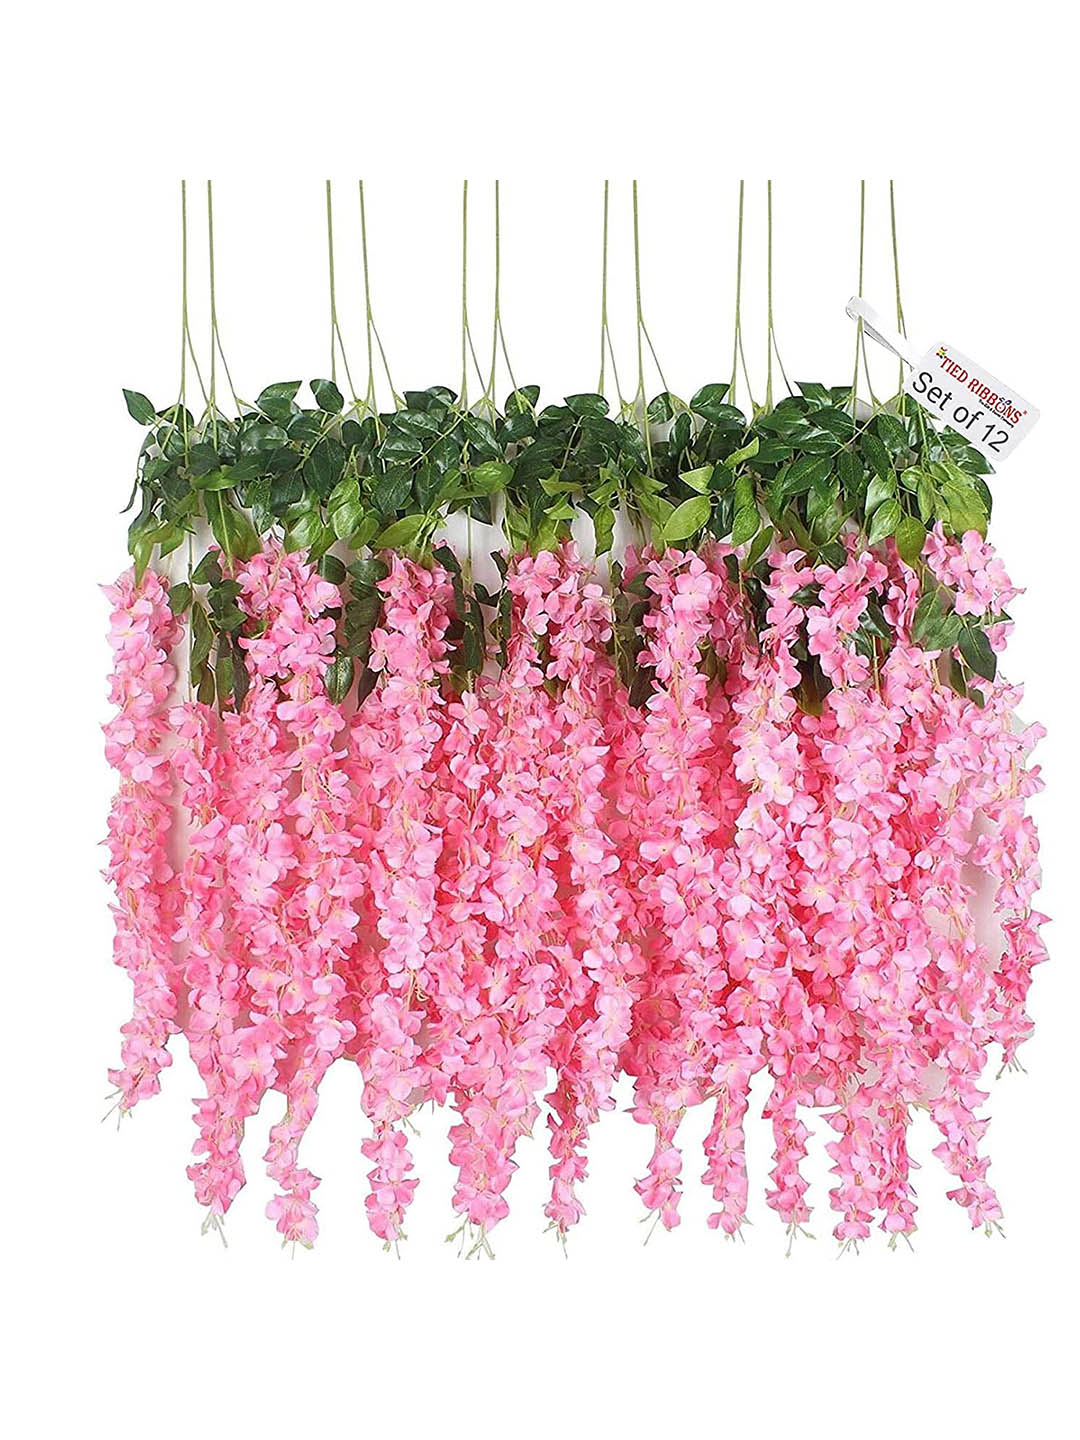 TIED RIBBONS Set Of 12 Pink & Green Artificial Hanging Wisteria Flower-Strings Price in India